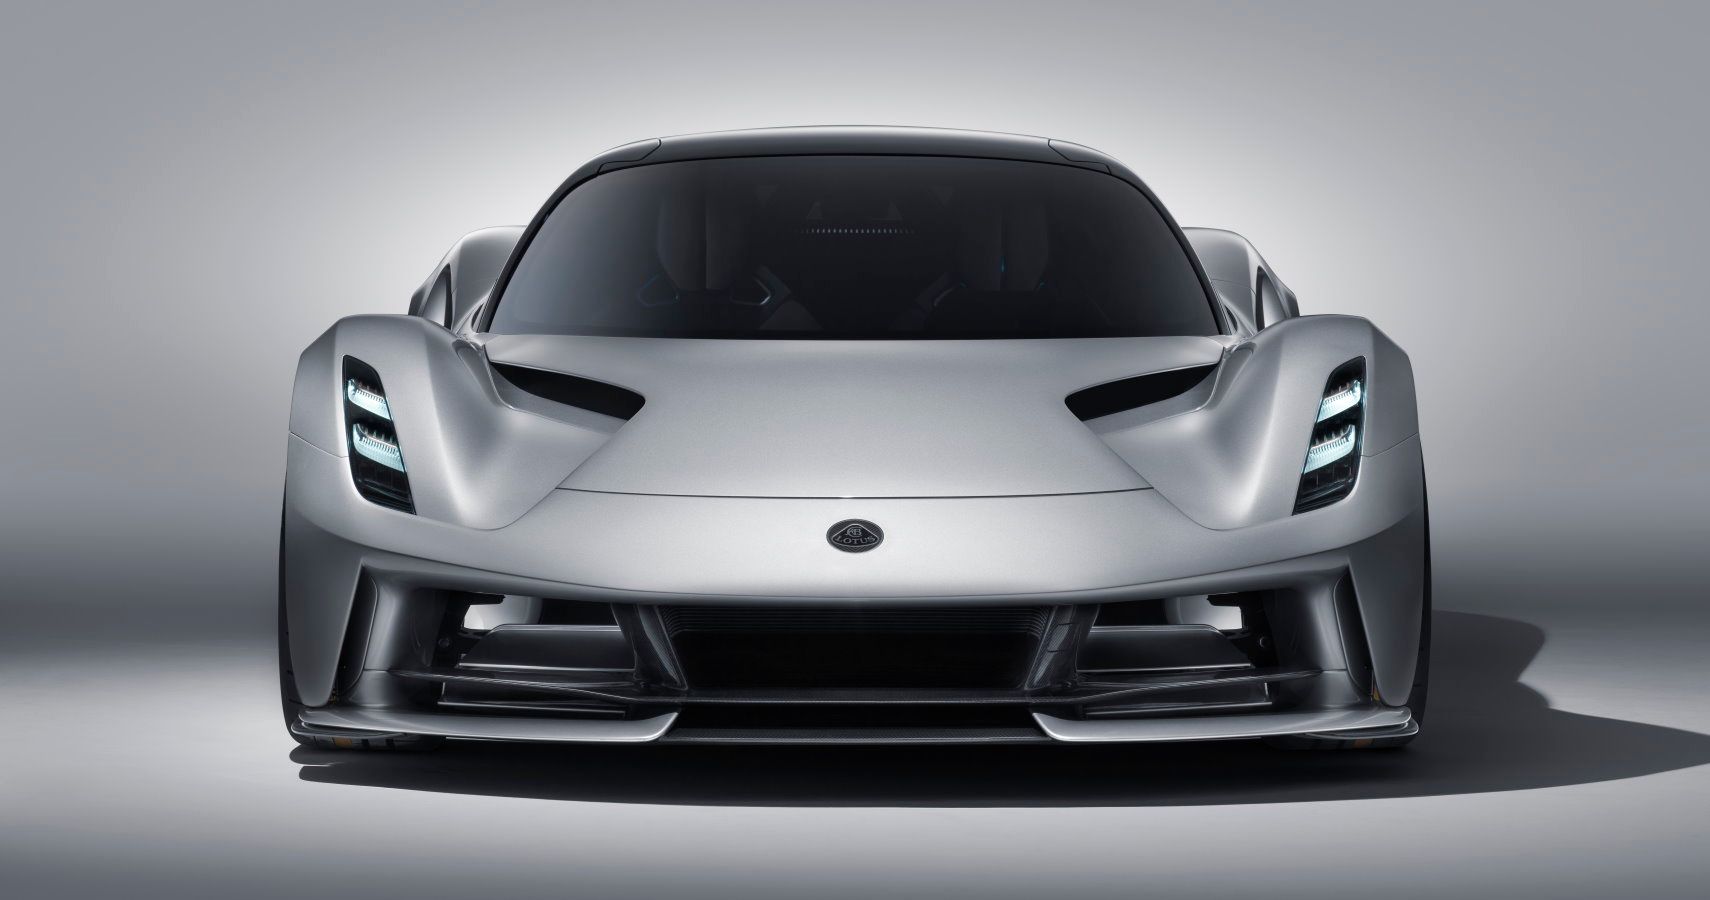 Lotus Evija To Go For Electric Vehicle Nurburgring Record